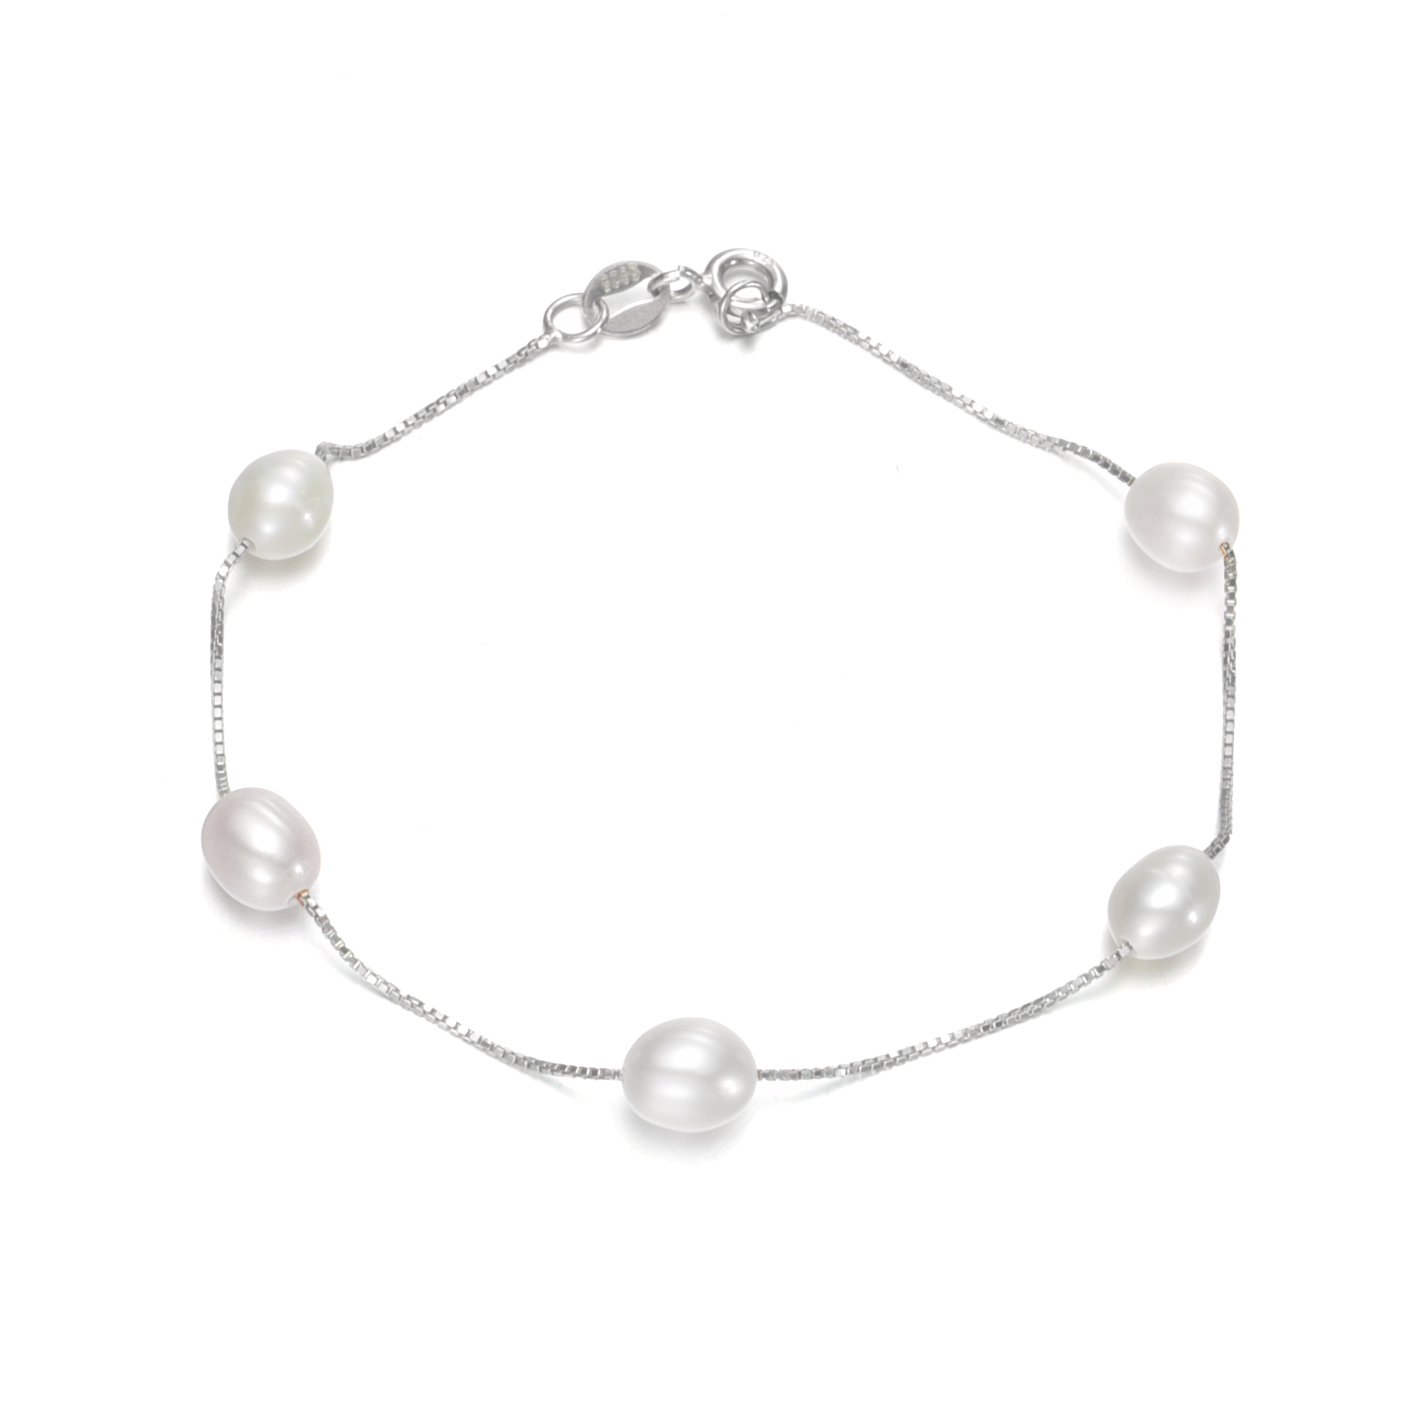 7mm AAA drop good quality 925 sterling silver chain white natural pearl bracelet wedding